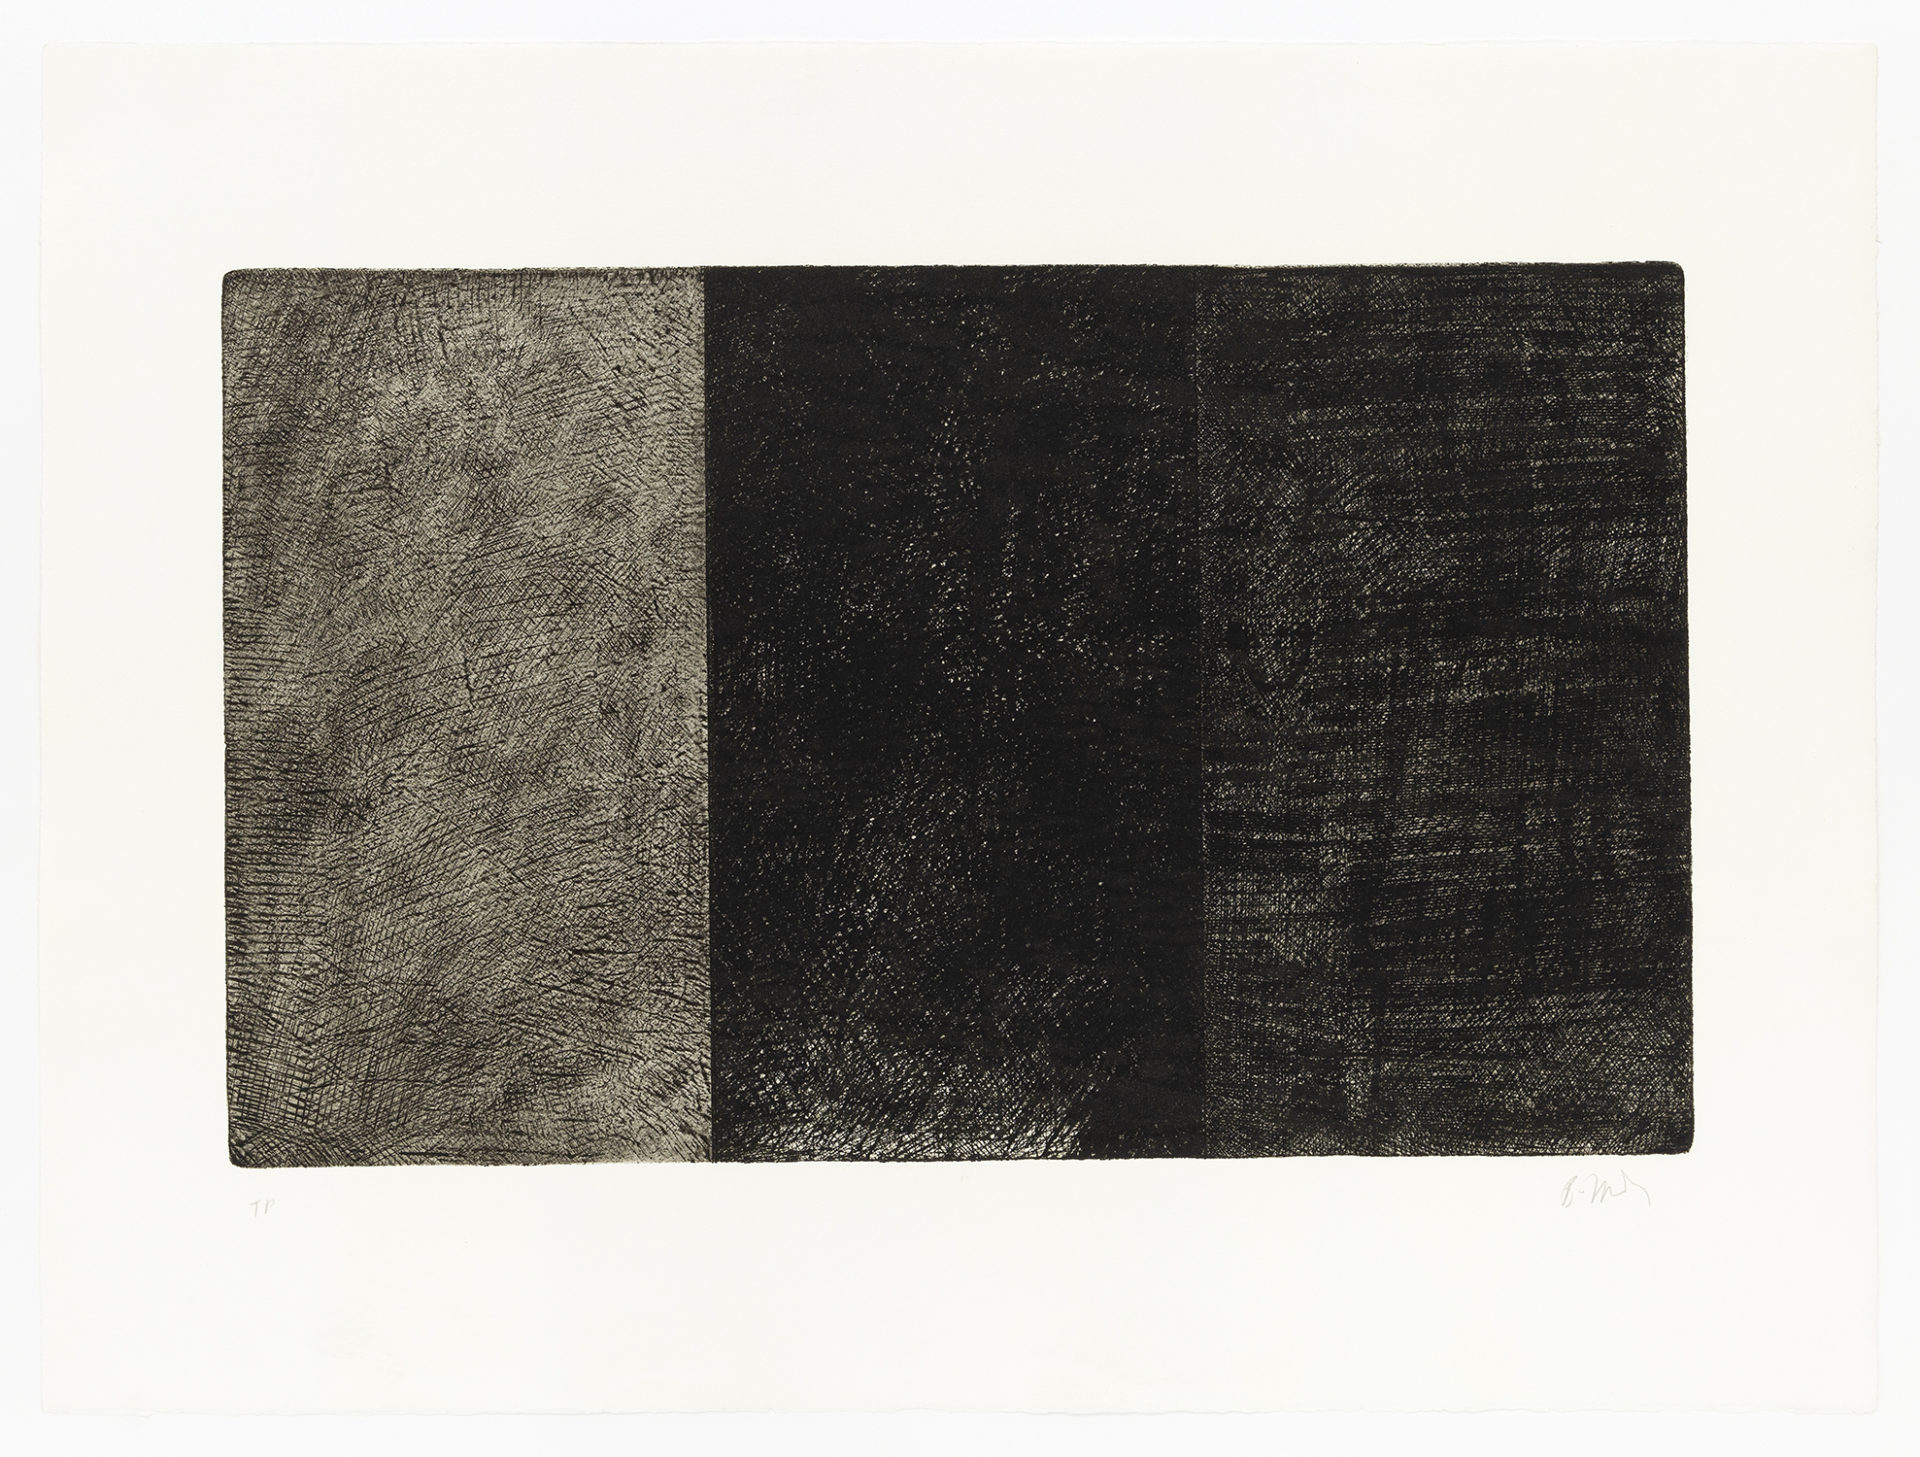 Untitled, 1971, Etching, 23 1/16 x 29 7/16 inches (58.6 x 74.8 cm), Edition of 50